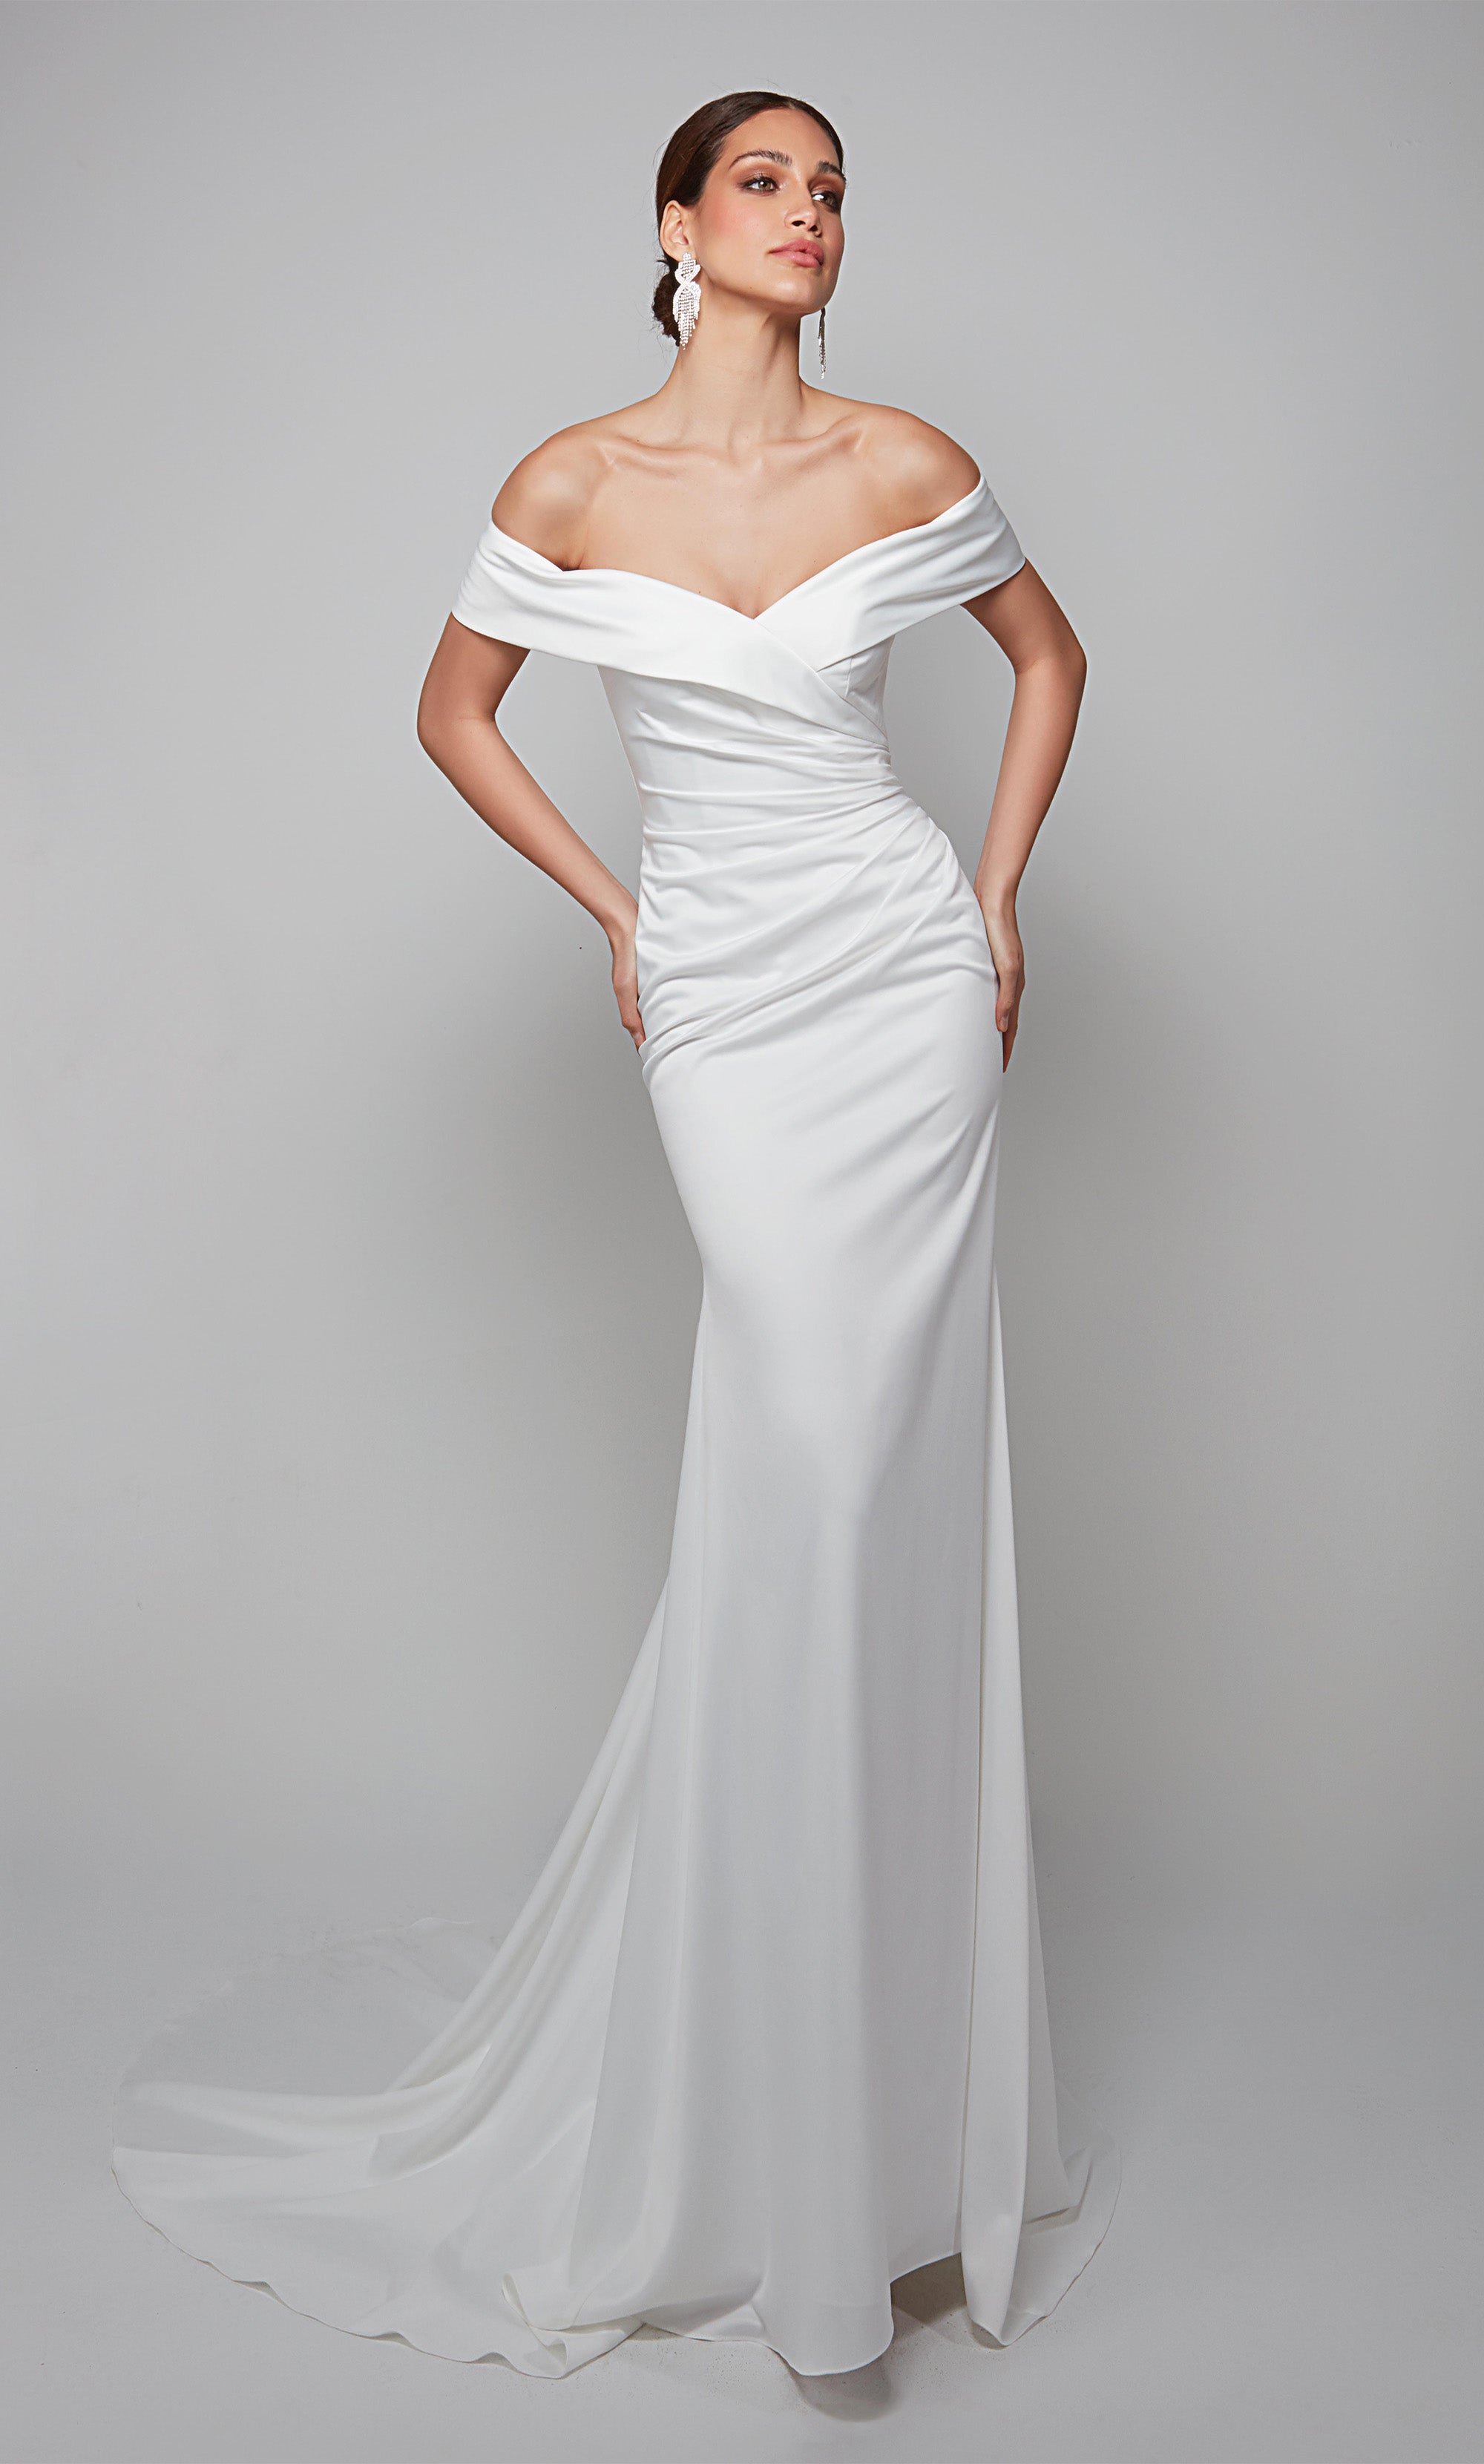 Off the shoulder chic wedding gown with ruching detail in diamond white. Color-SWATCH_7059__DIAMOND-WHITE